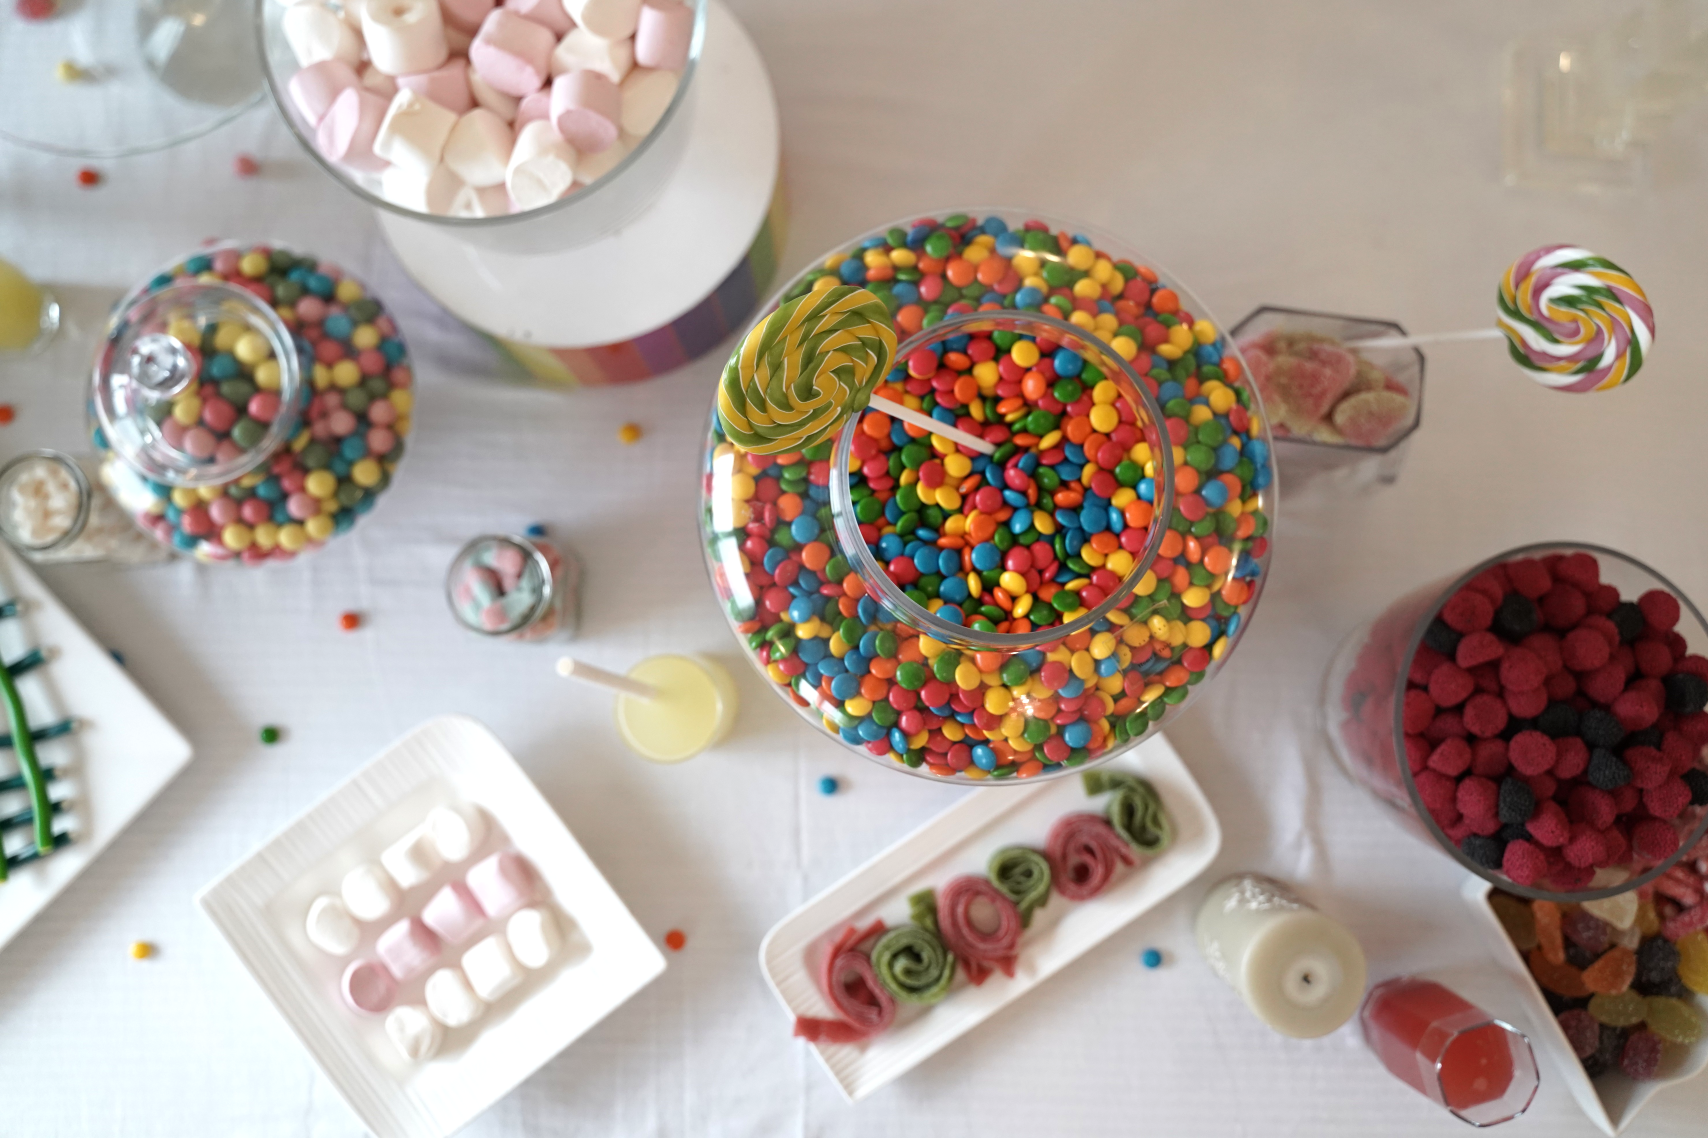 We Tried These Top 10 Candies at House of Candy, and We Just Can’t Get Enough